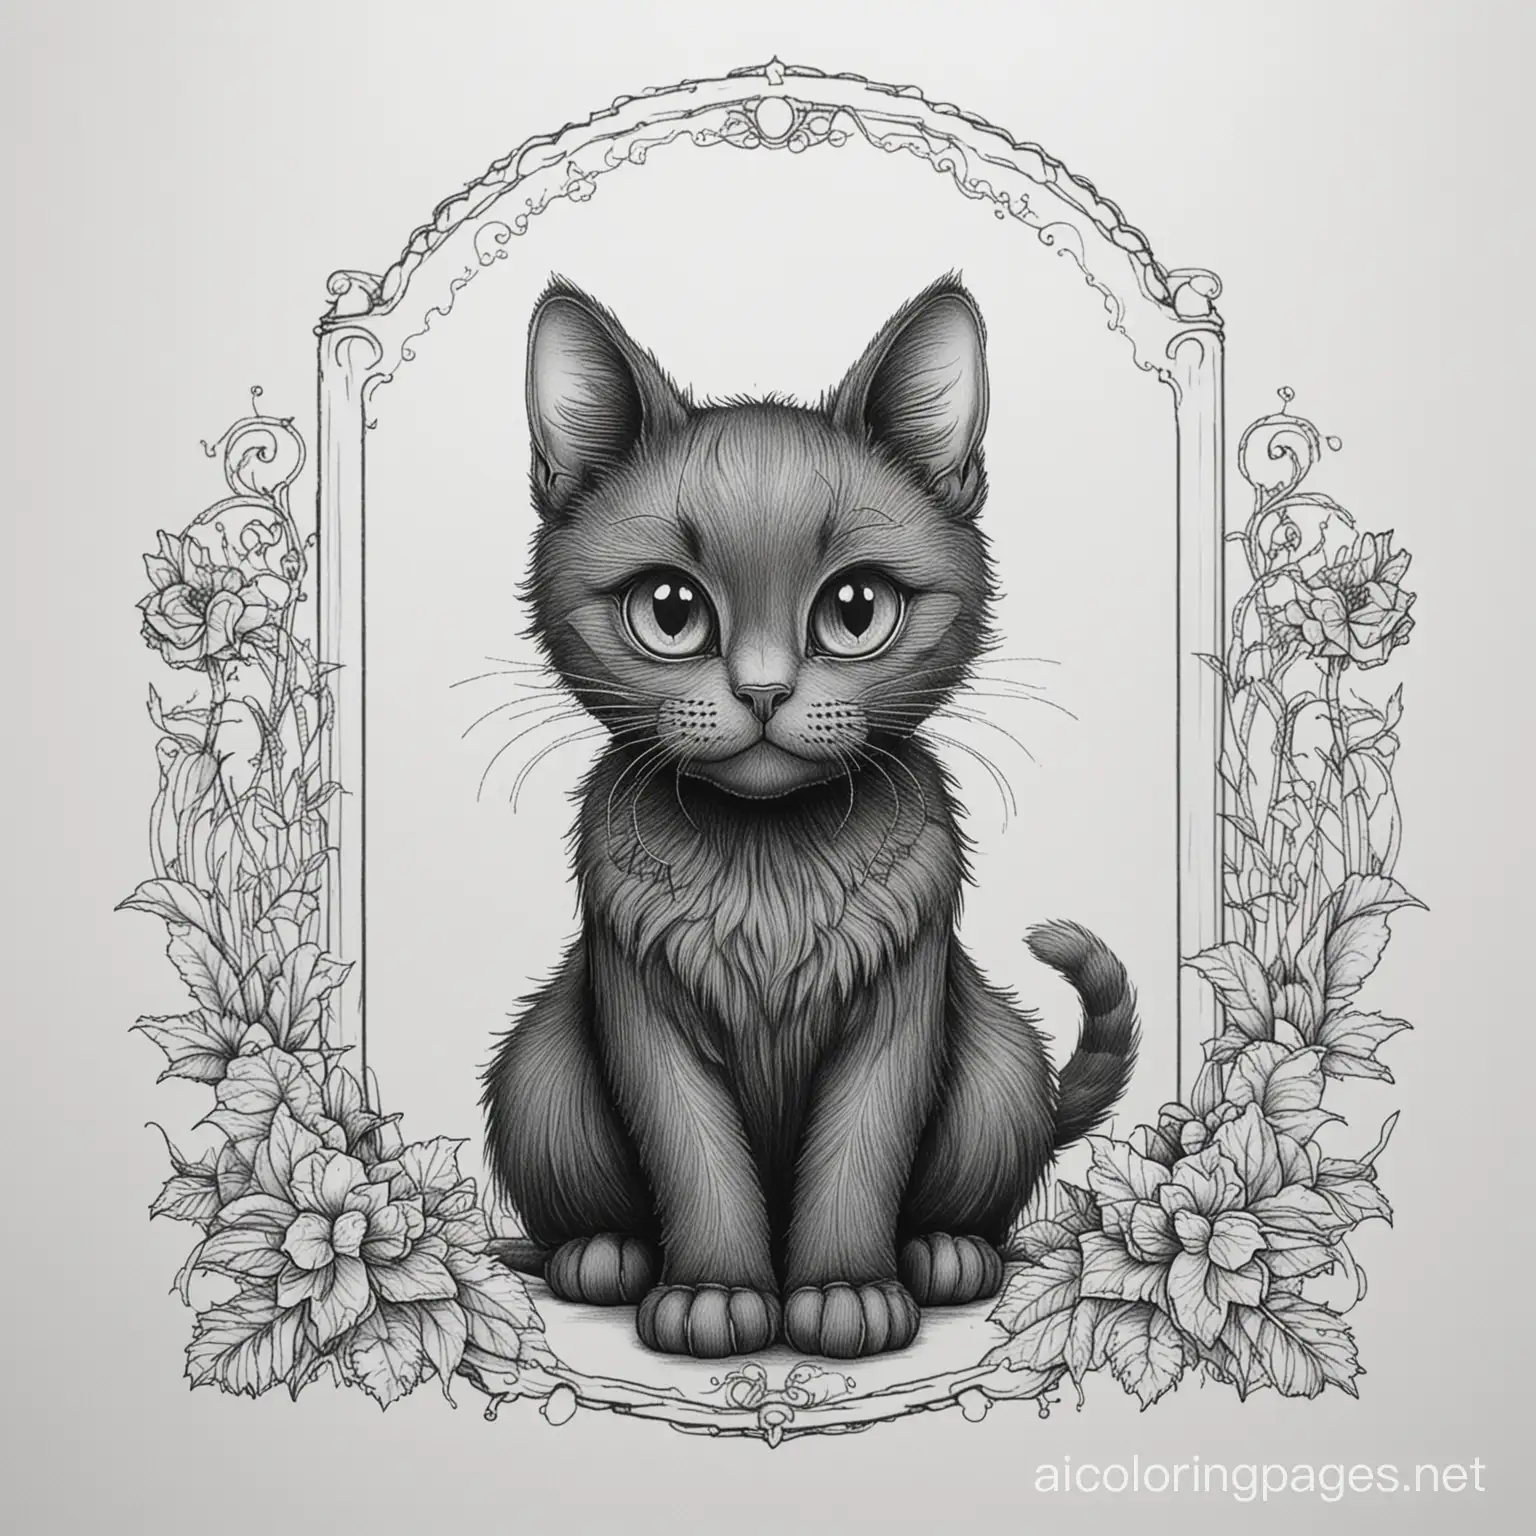 gothic black cat
, Coloring Page, black and white, line art, white background, Simplicity, Ample White Space. The background of the coloring page is plain white to make it easy for young children to color within the lines. The outlines of all the subjects are easy to distinguish, making it simple for kids to color without too much difficulty